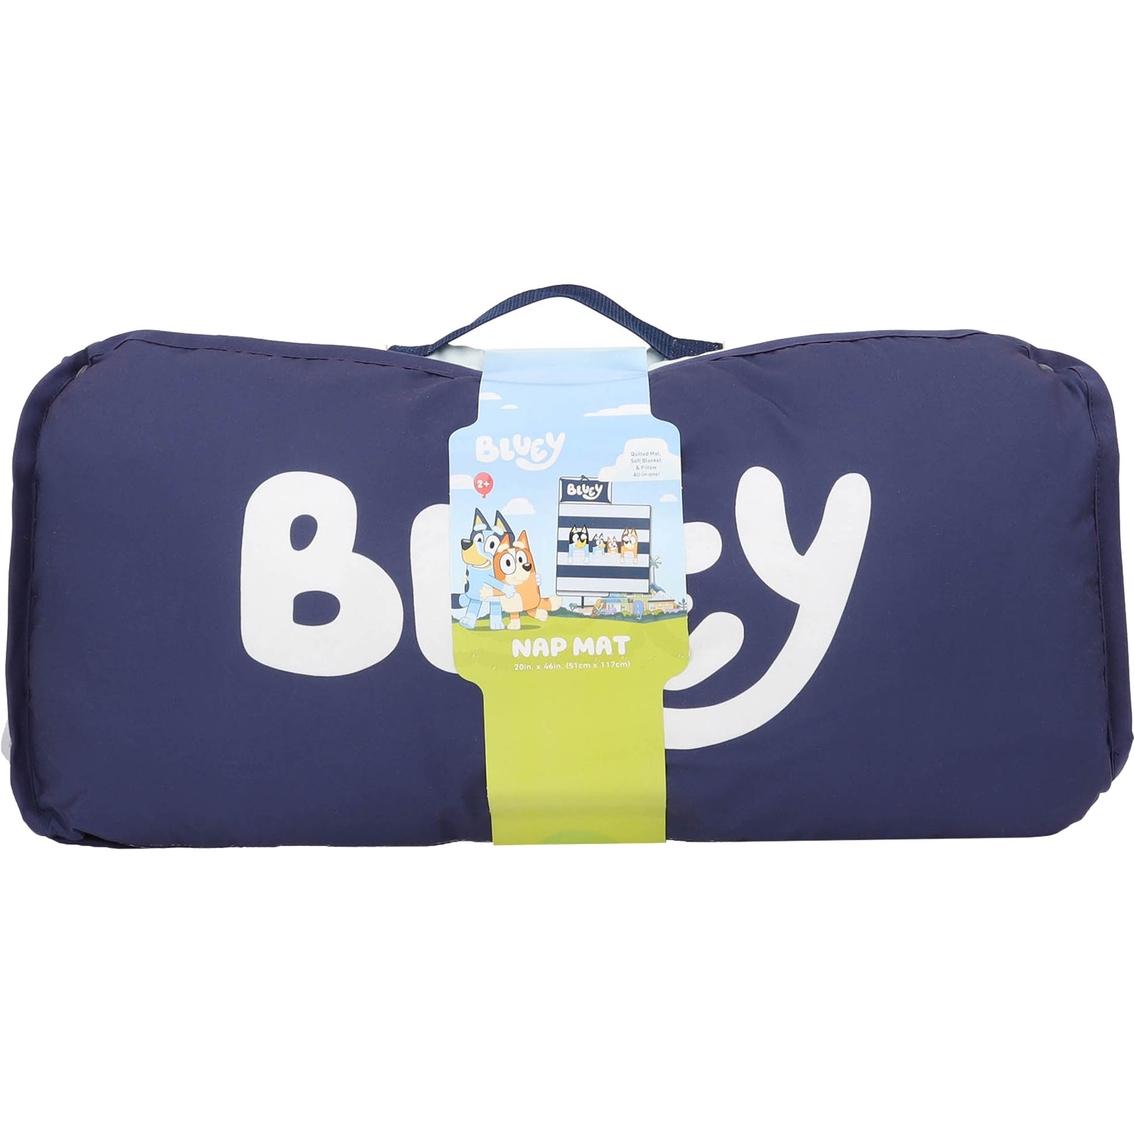 Bluey 20 x 46 in. Nap Mat - Image 2 of 7